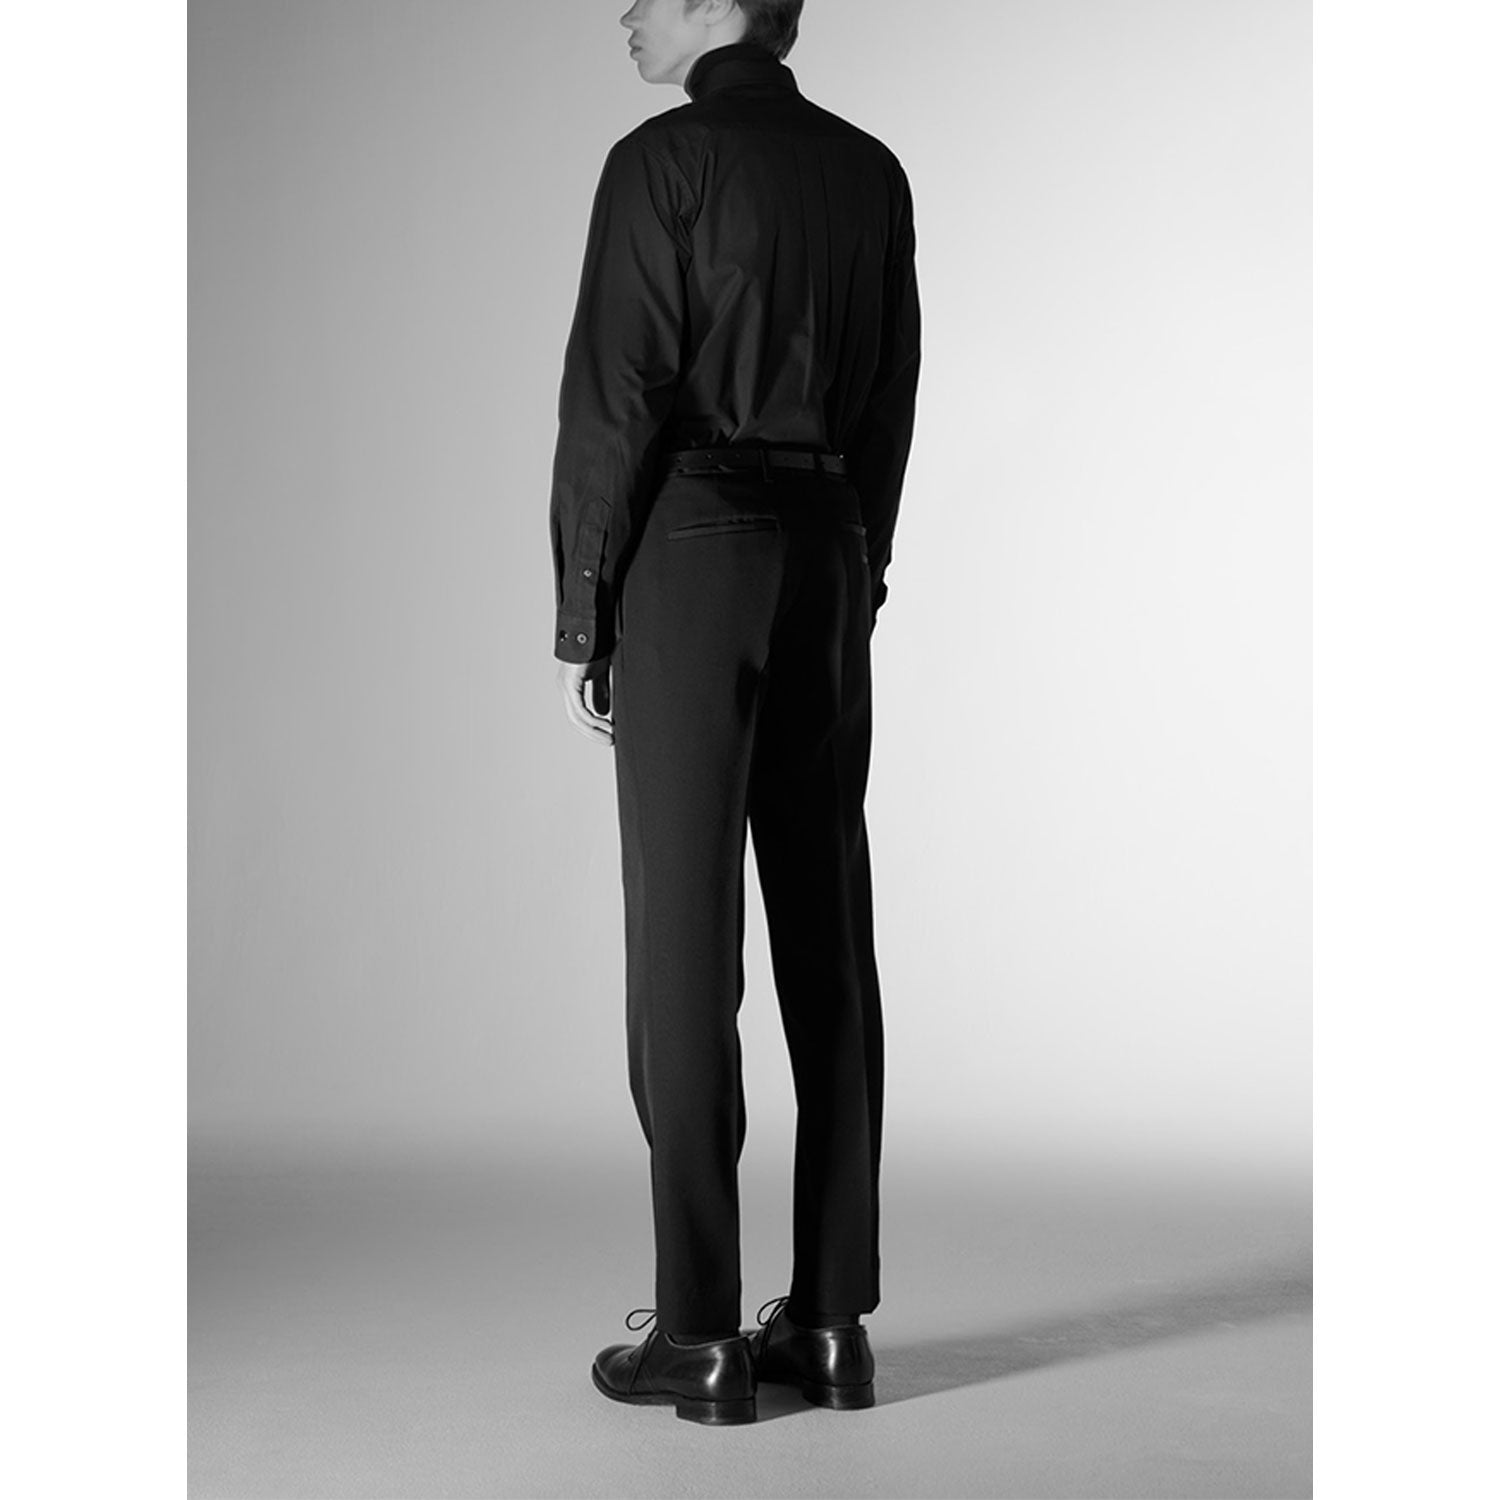 LOWITT / Slim Tailored Pants / black – th products